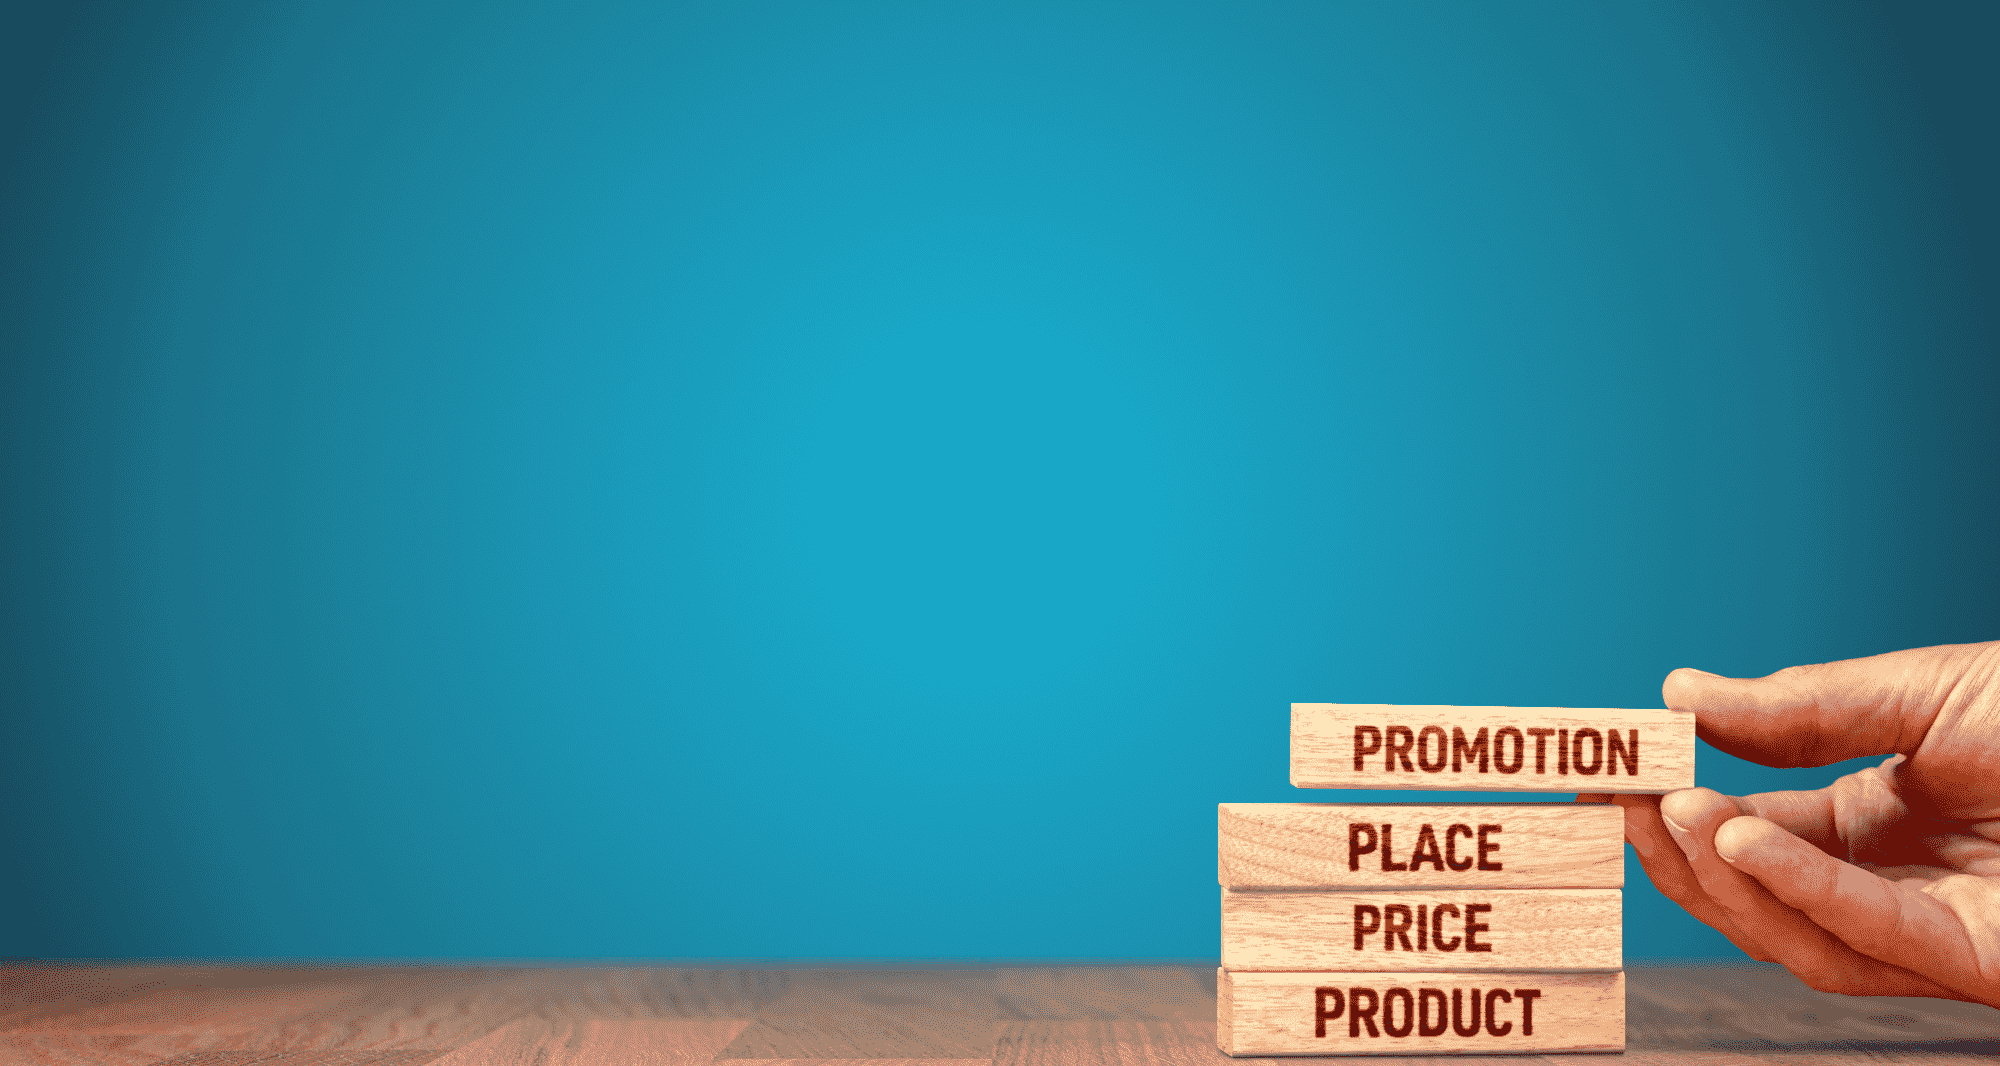 4 promotion. Pricing placing promotion. Promotion. Place promotion. Product Promo place background.